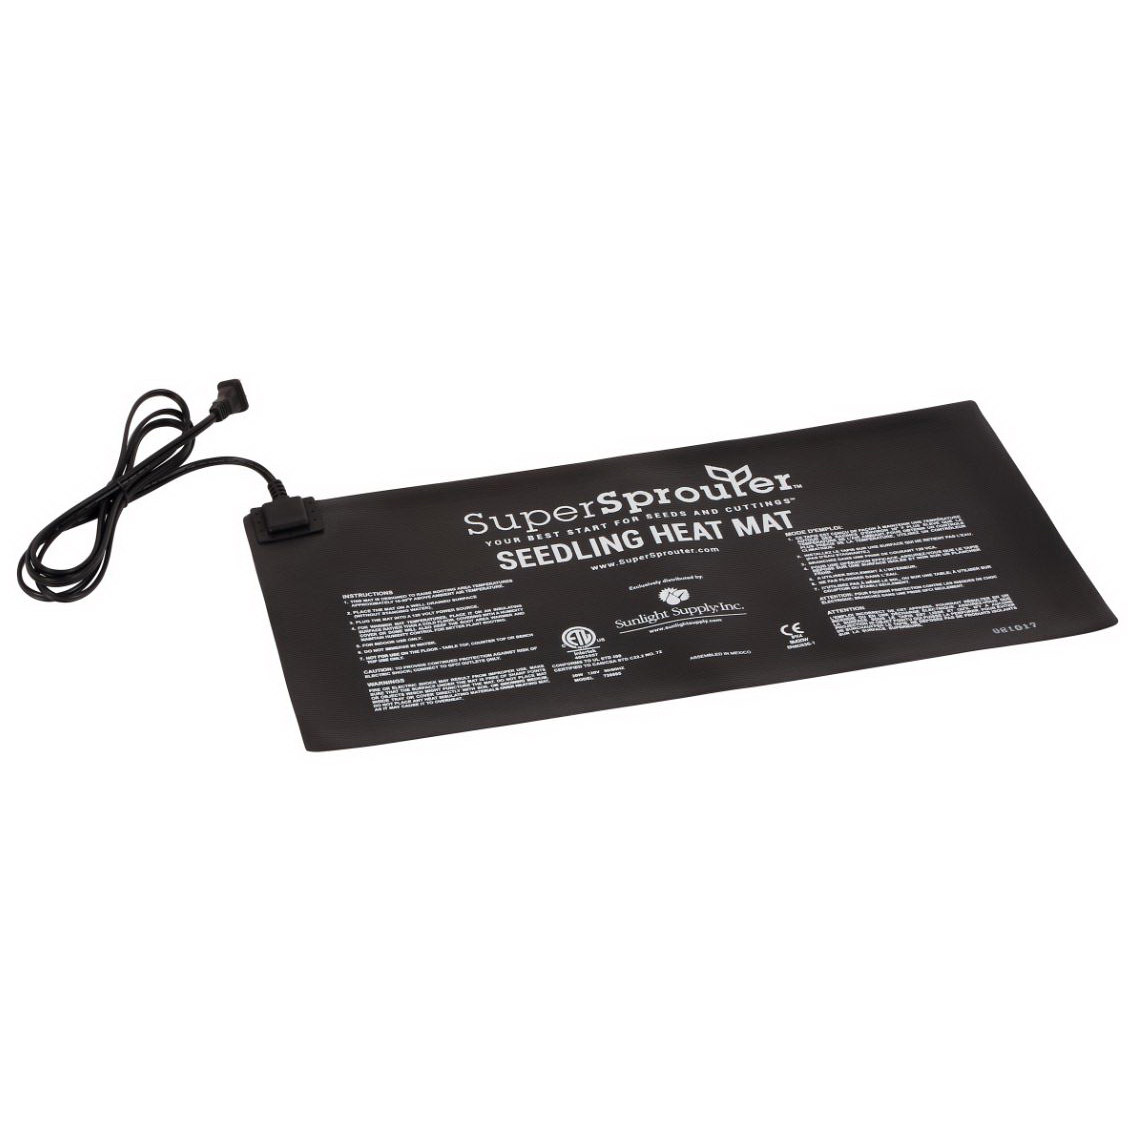 Super Sprouter Y03 726695 Seedling Heat Mat, 21 in L, 10 in W, 120 V - 1